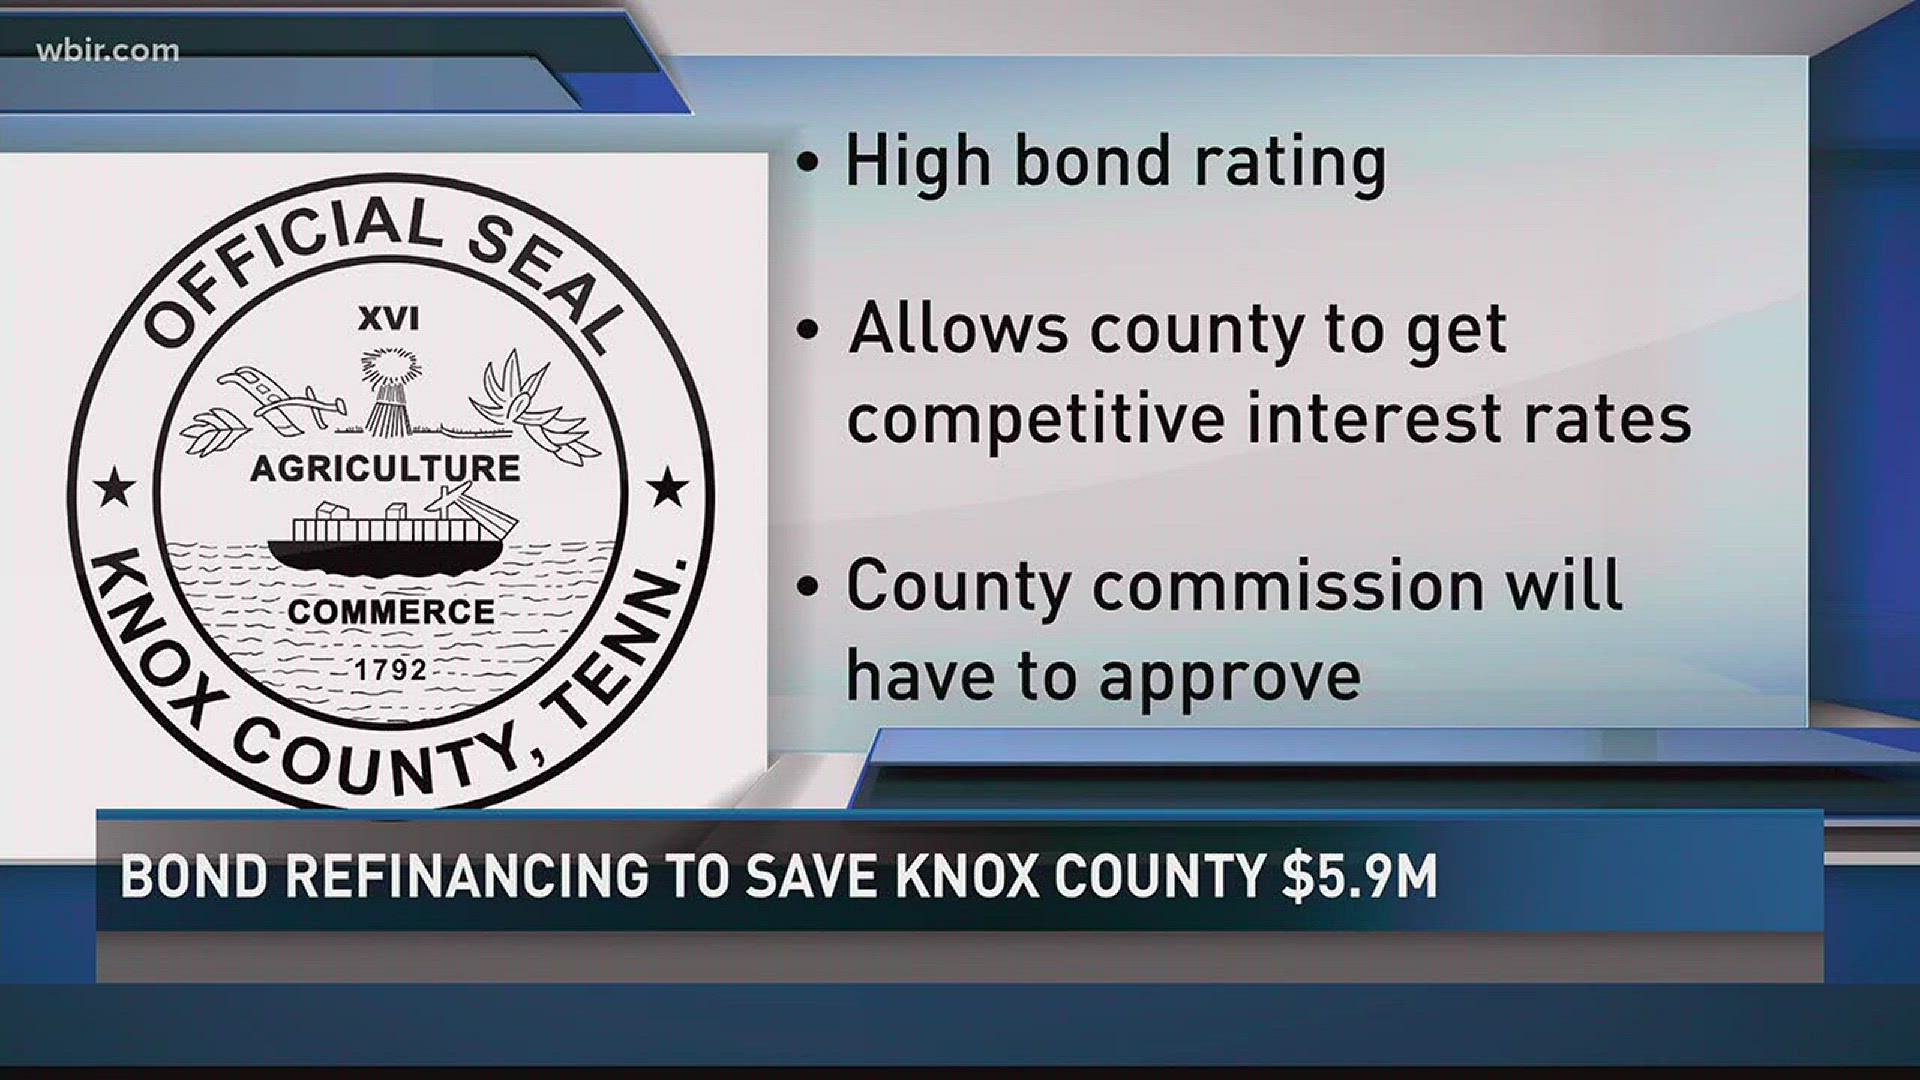 The Mayor's Office says Knox County's high bond rating allows the county to secure competitive interest rates in the bond market.